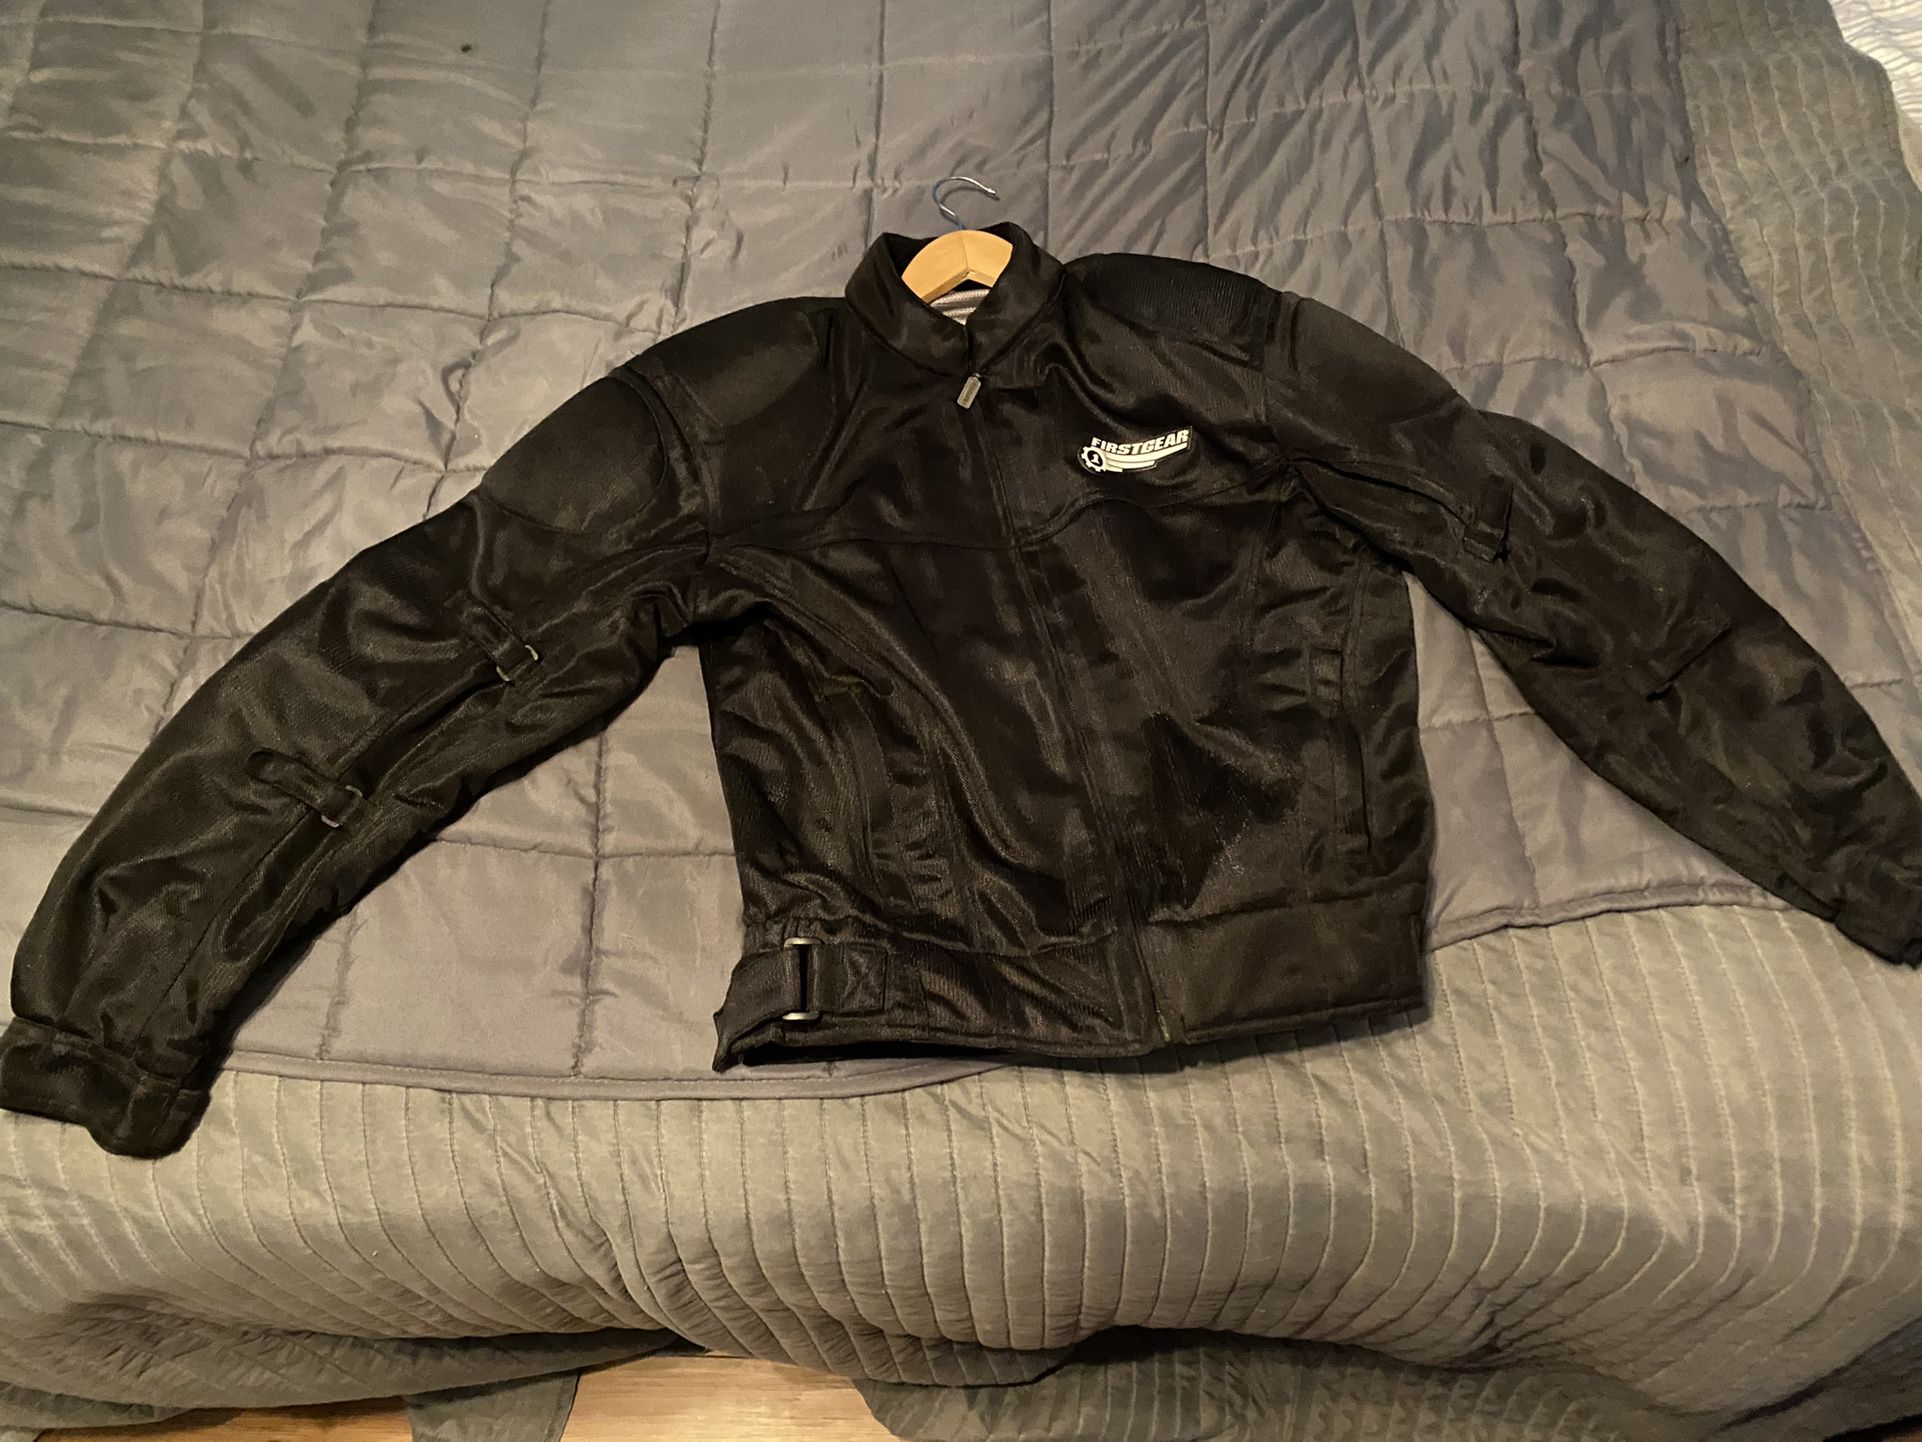 First gear Motorcycle Jacket With Padding